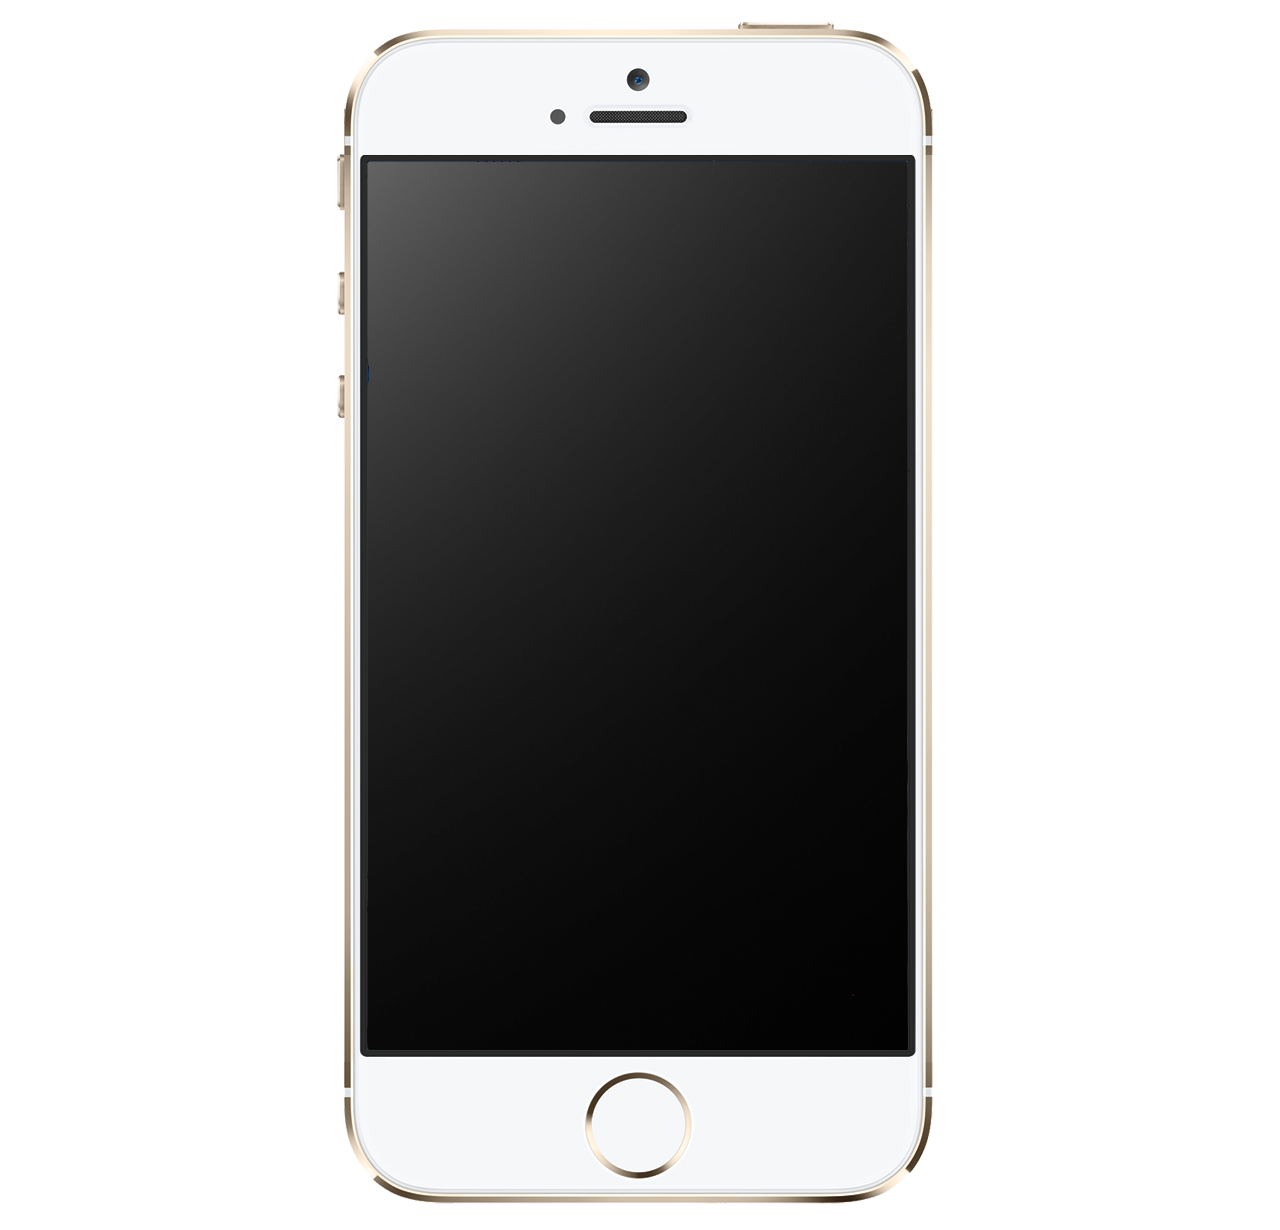 Apple iPhone Free PNG Image